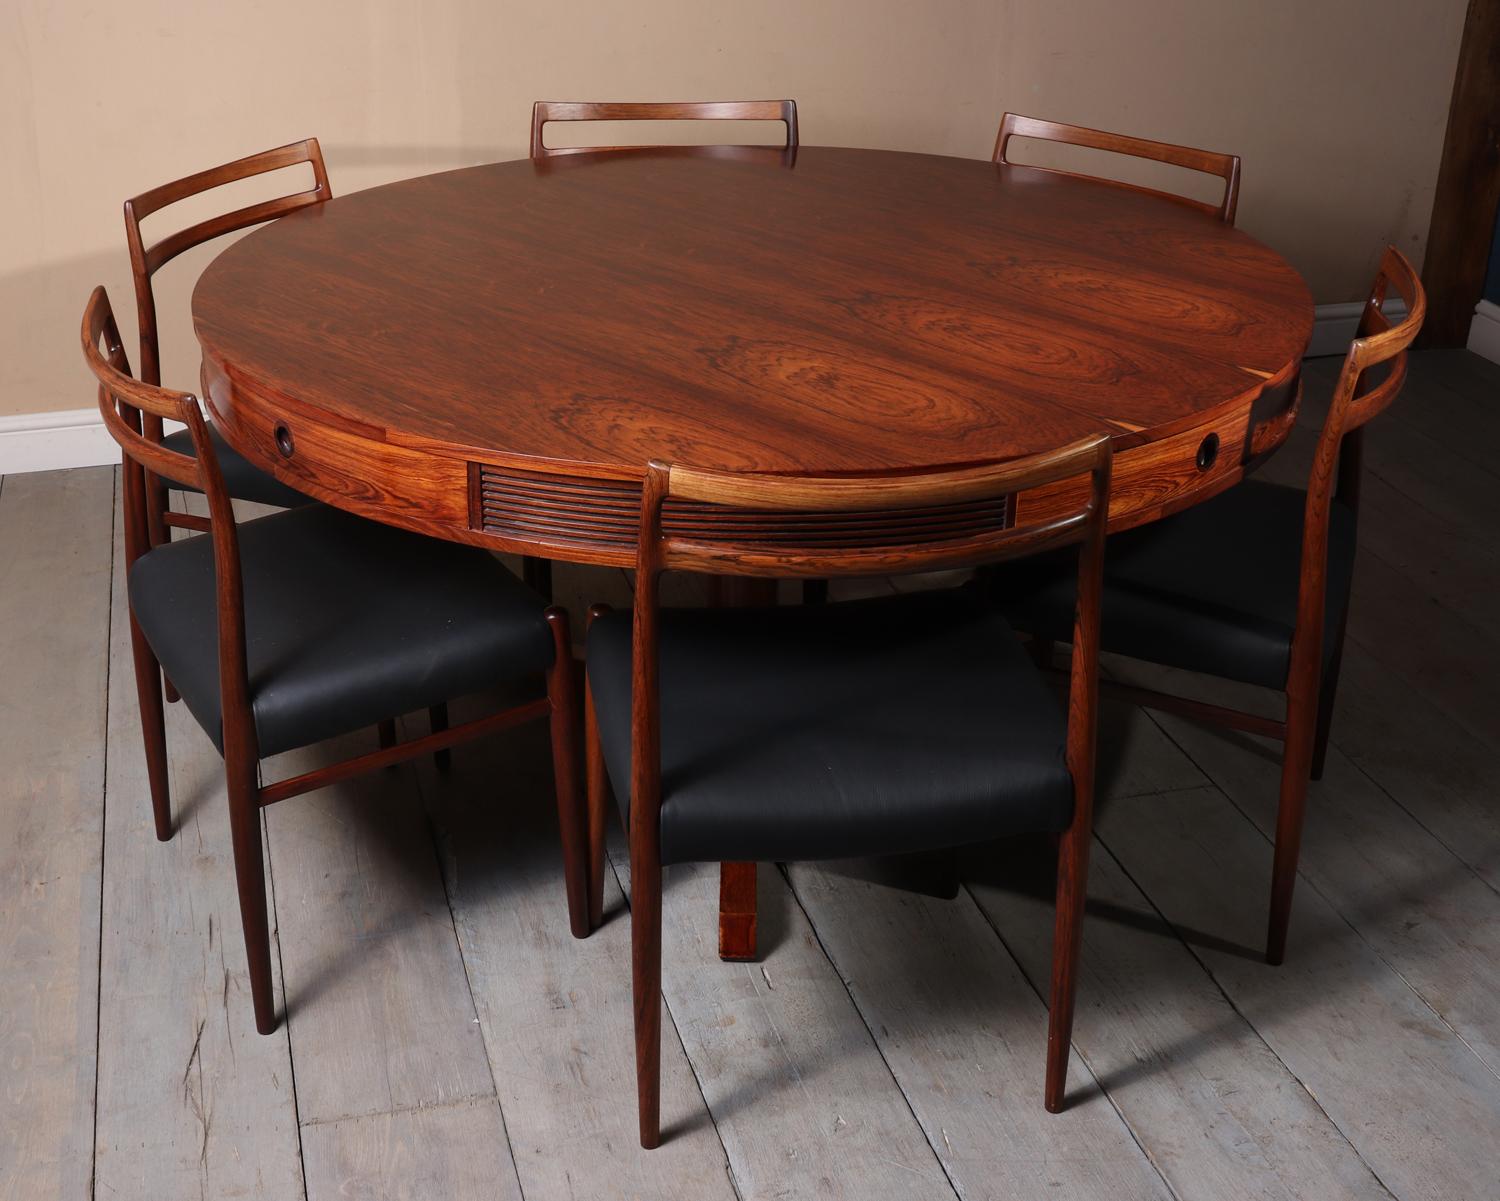 Mid-20th Century Rosewood Drum Table by Robert Heritage for Archie Shine, circa 1957